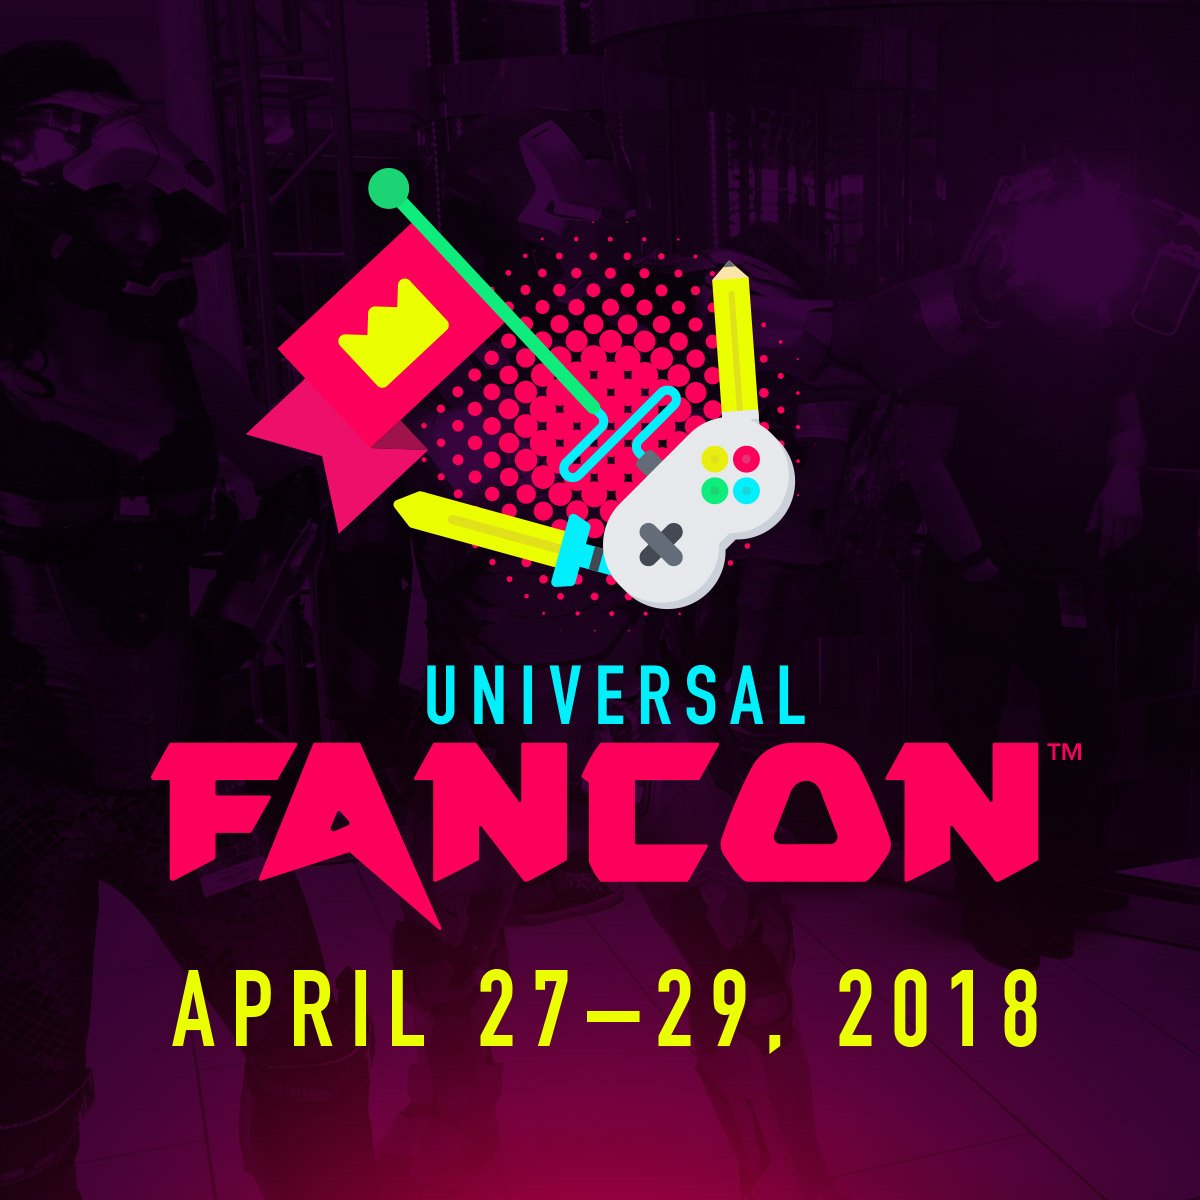 Baltimore’s universal fancon promises to be geek gathering for the ages